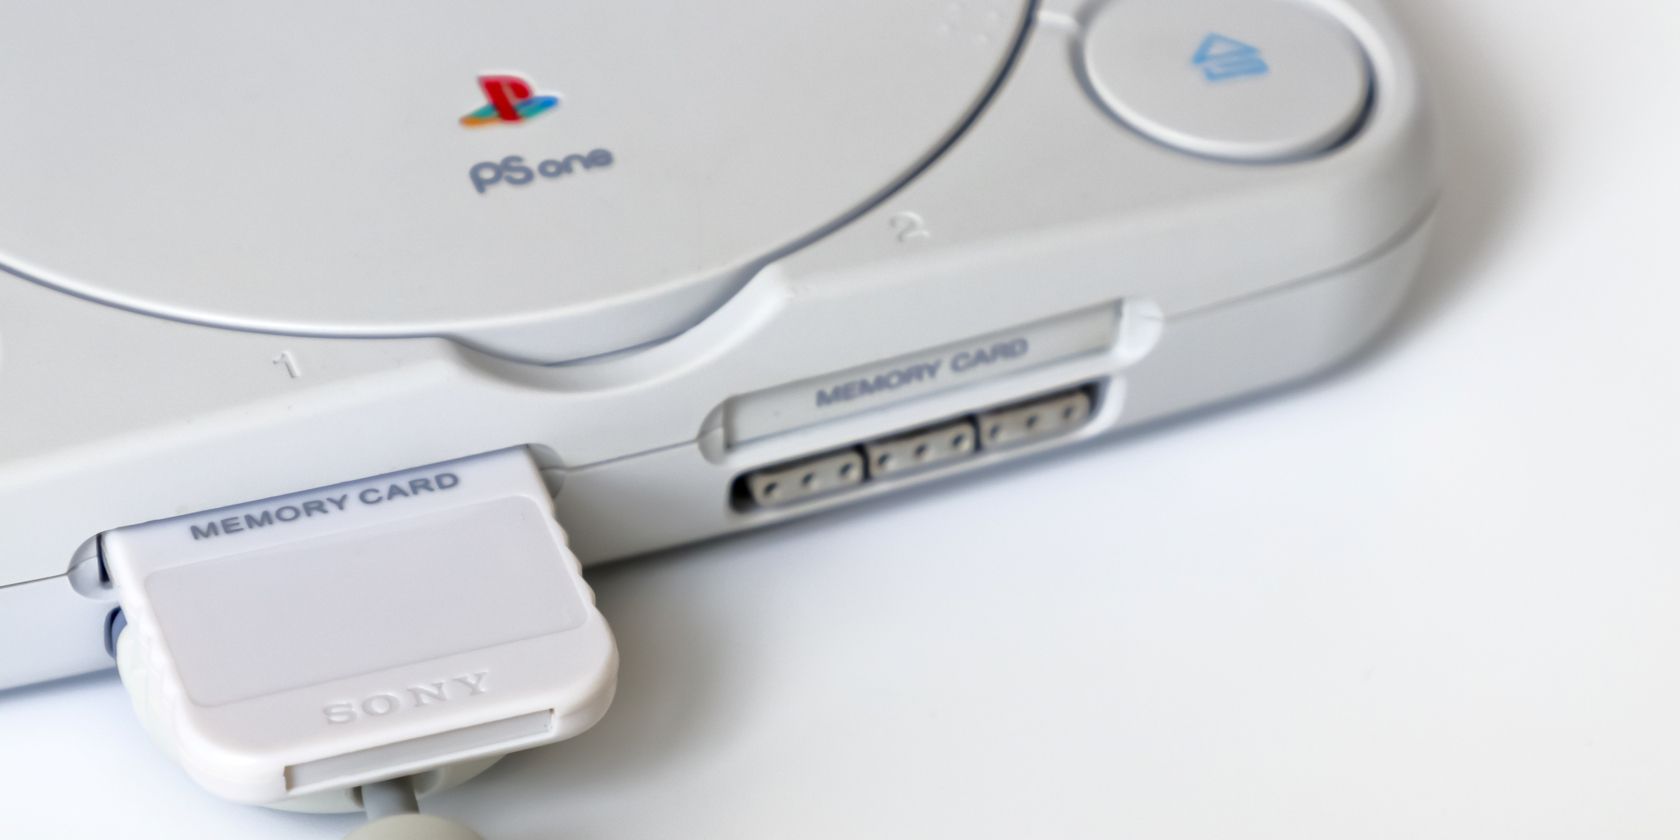 PSone console with memory card inserted